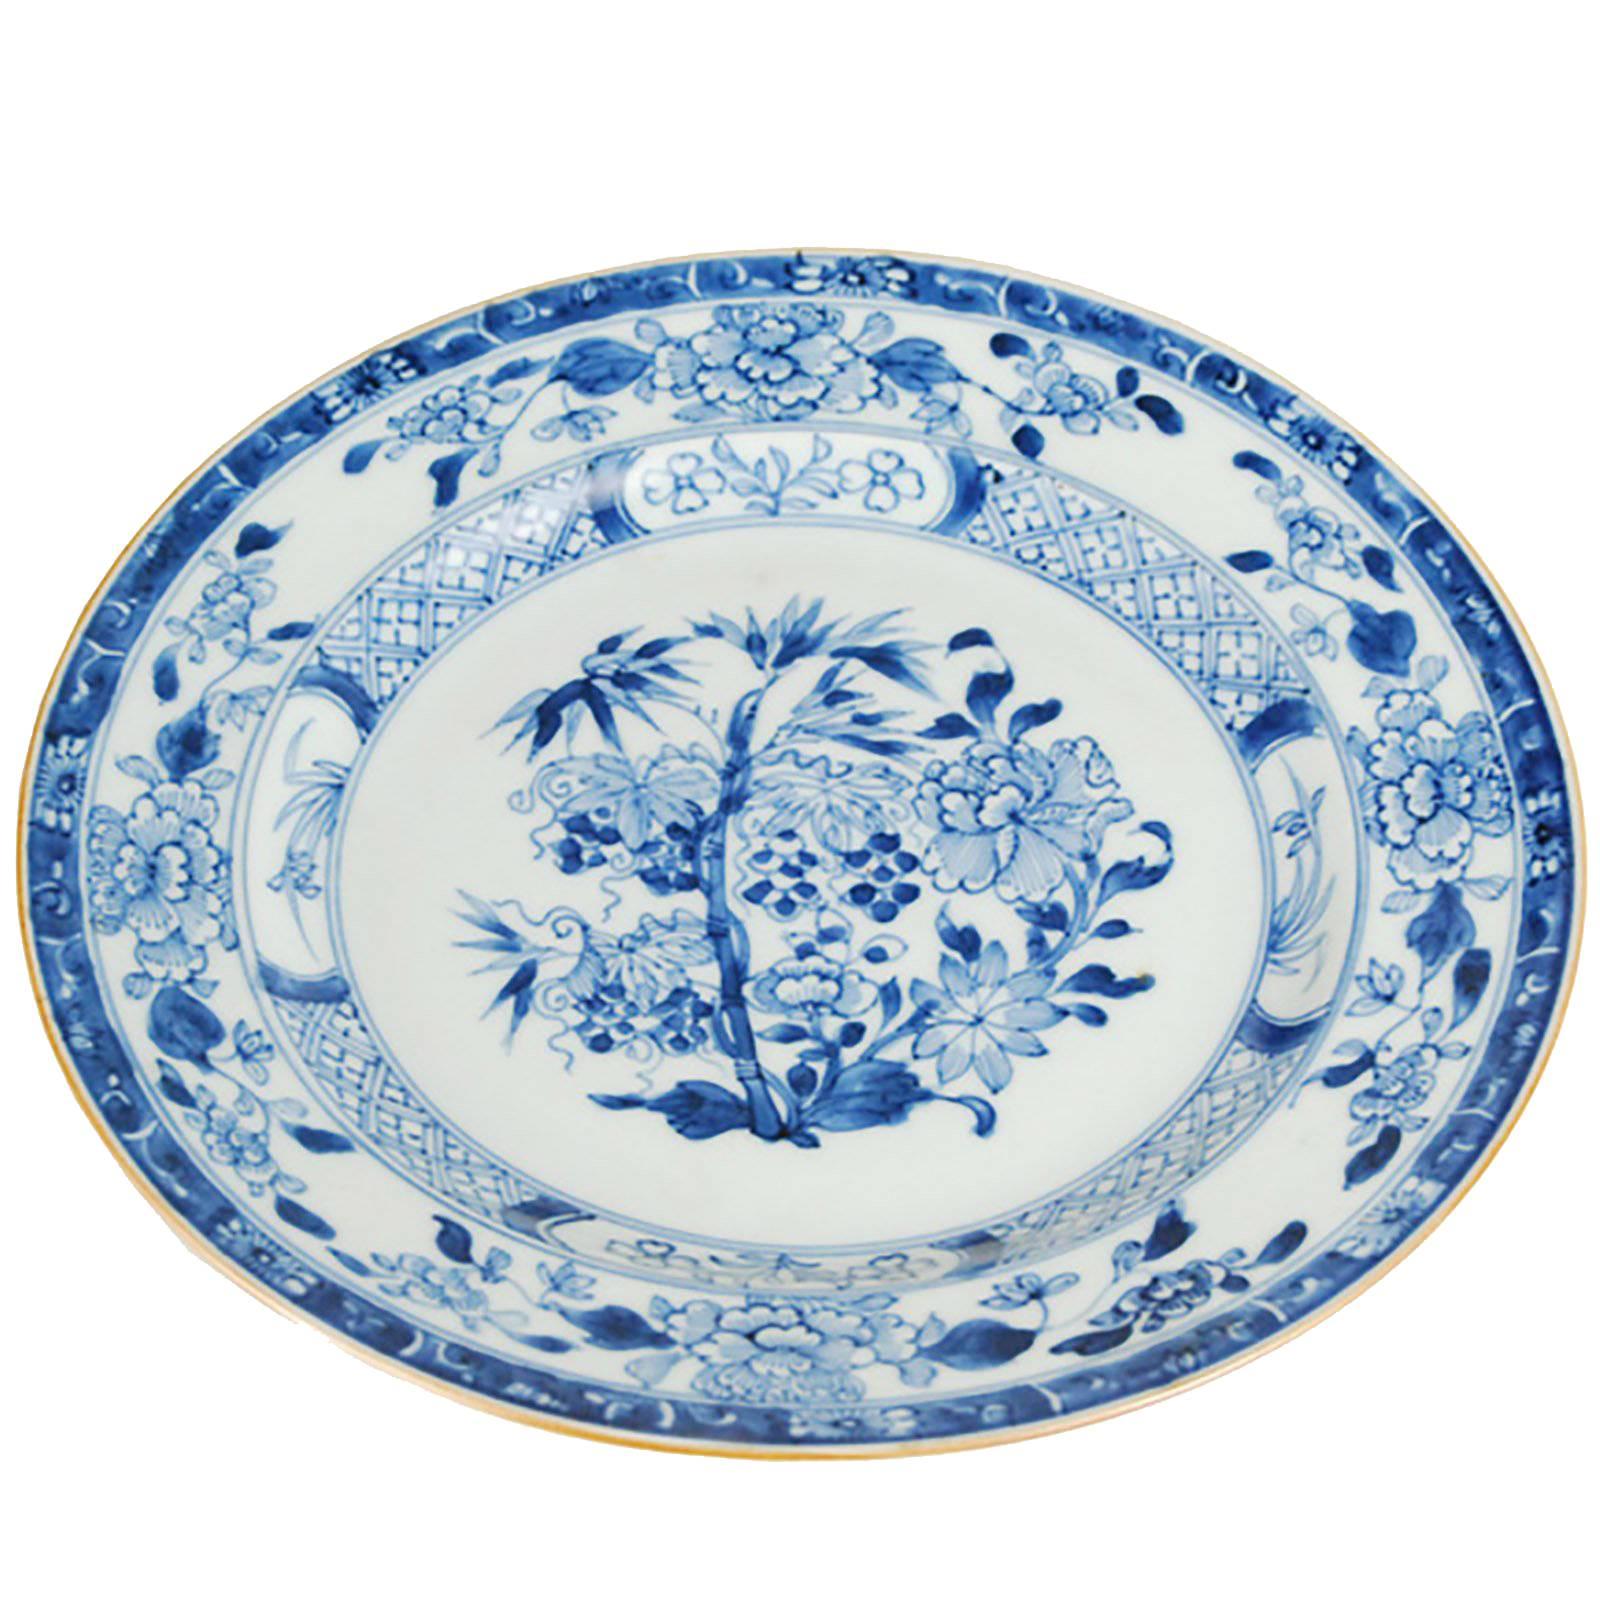 Chinese Blue and White Plate with Floral Motif